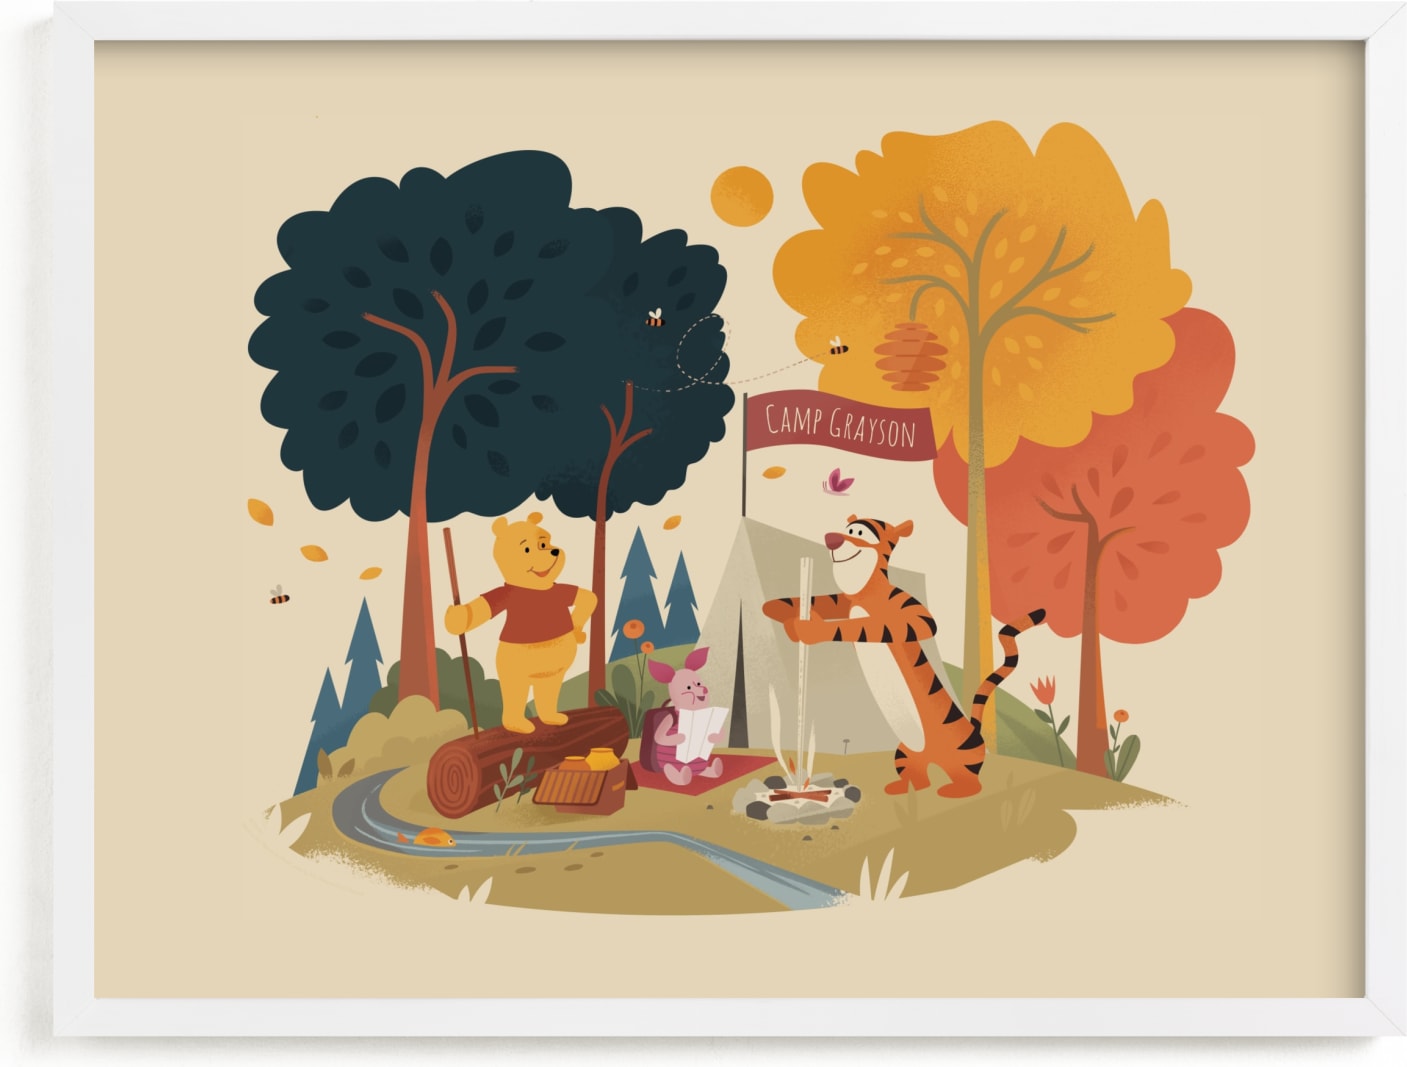 This is a beige disney art by Morgan Ramberg called Disney's Pooh Goes Camping.